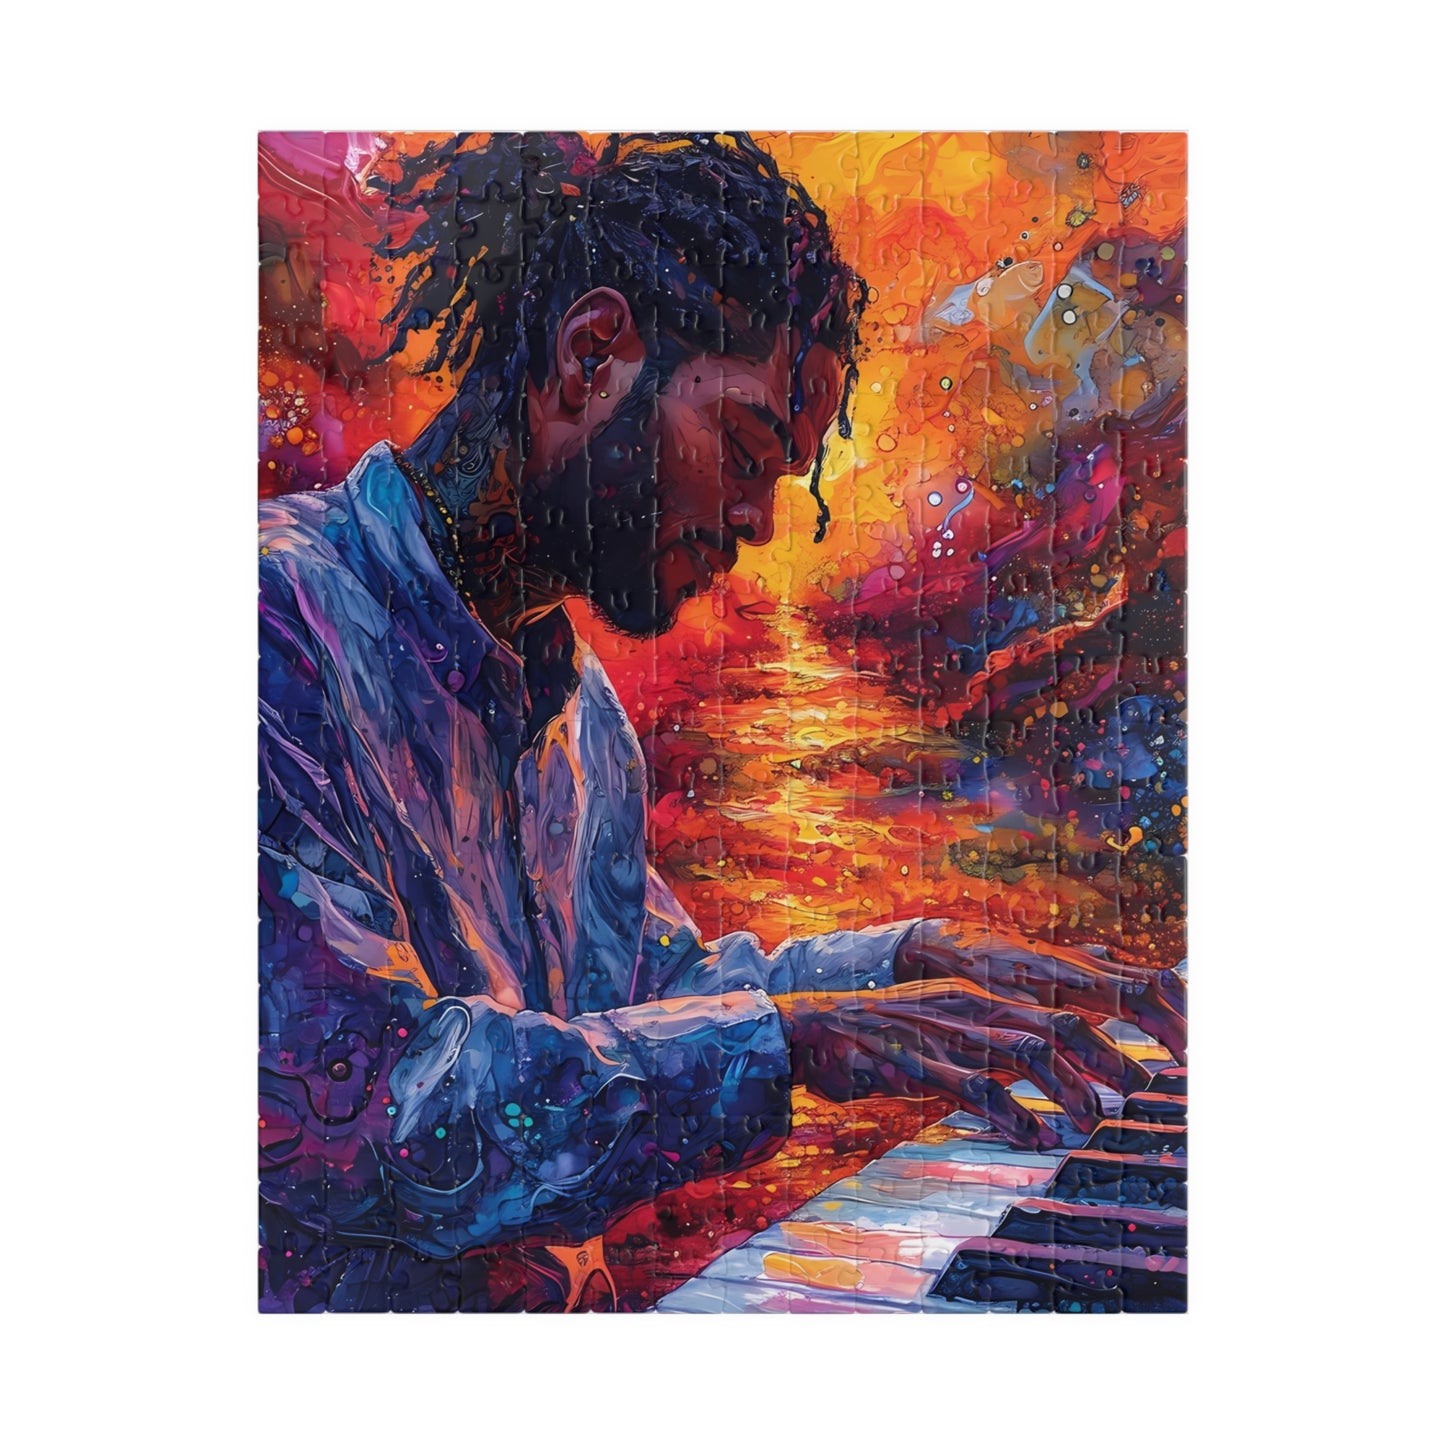 Jazz Pianist Dreams - Colorful Abstract Art Puzzle